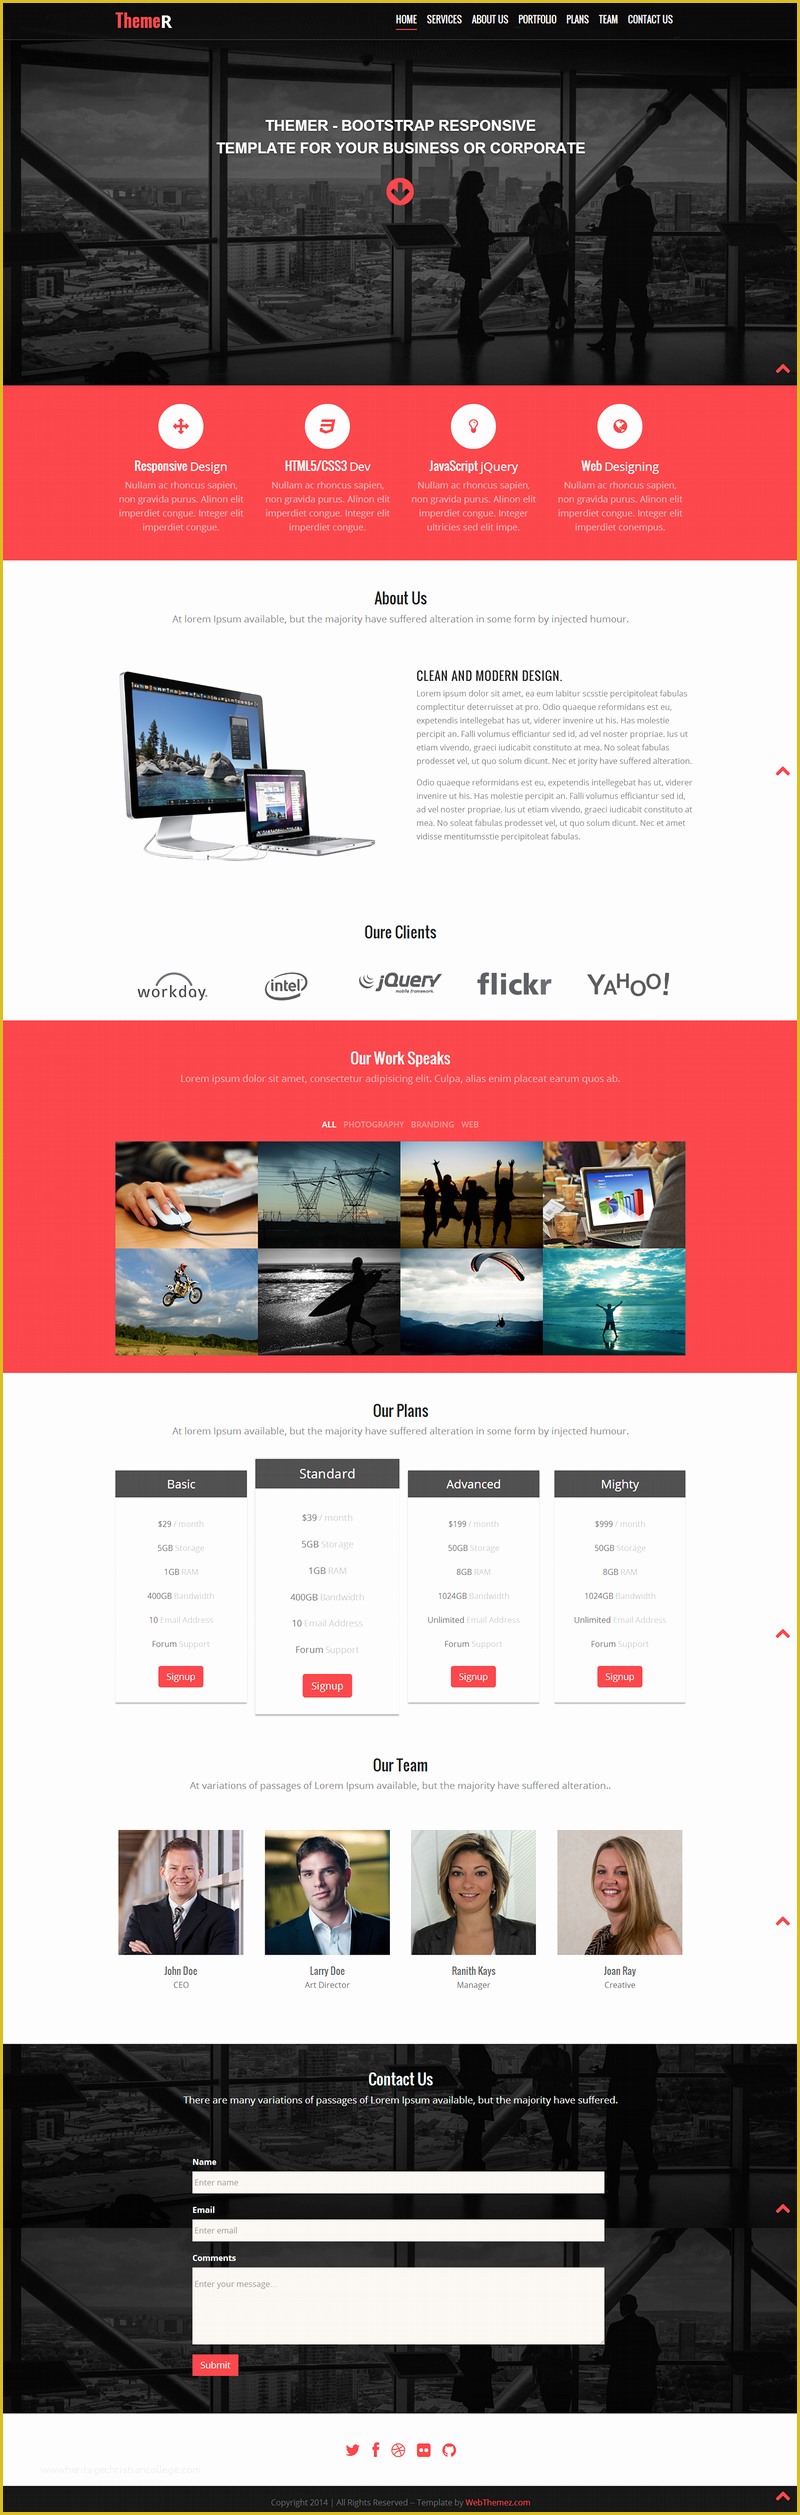 Bootstrap Responsive Templates Free Download Of 10 Best Free Website HTML5 Templates – August 2014